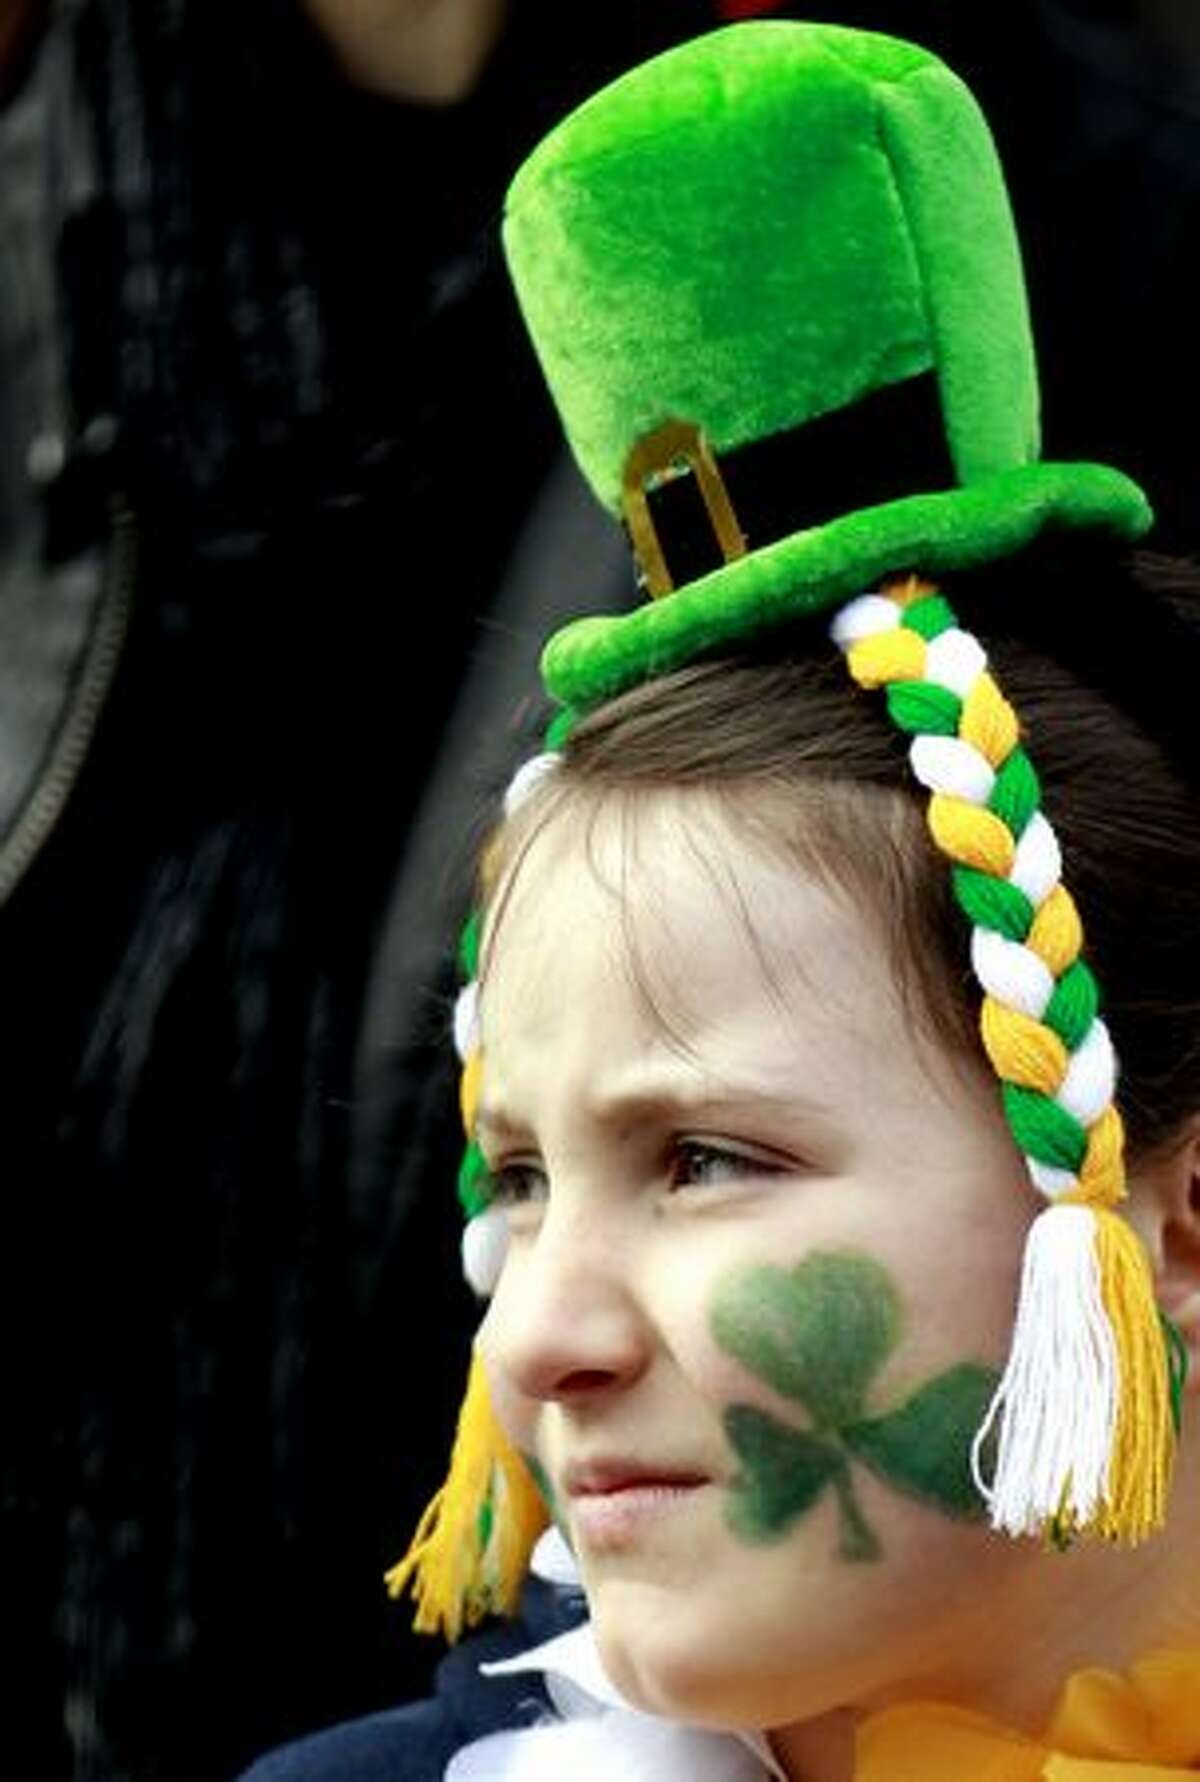 A girl enjoys the St. Patrick's Day celebrations in Belfast, Northern Ireland, Thursday, March, 17, 2011. (AP Photo/Peter Morrison)